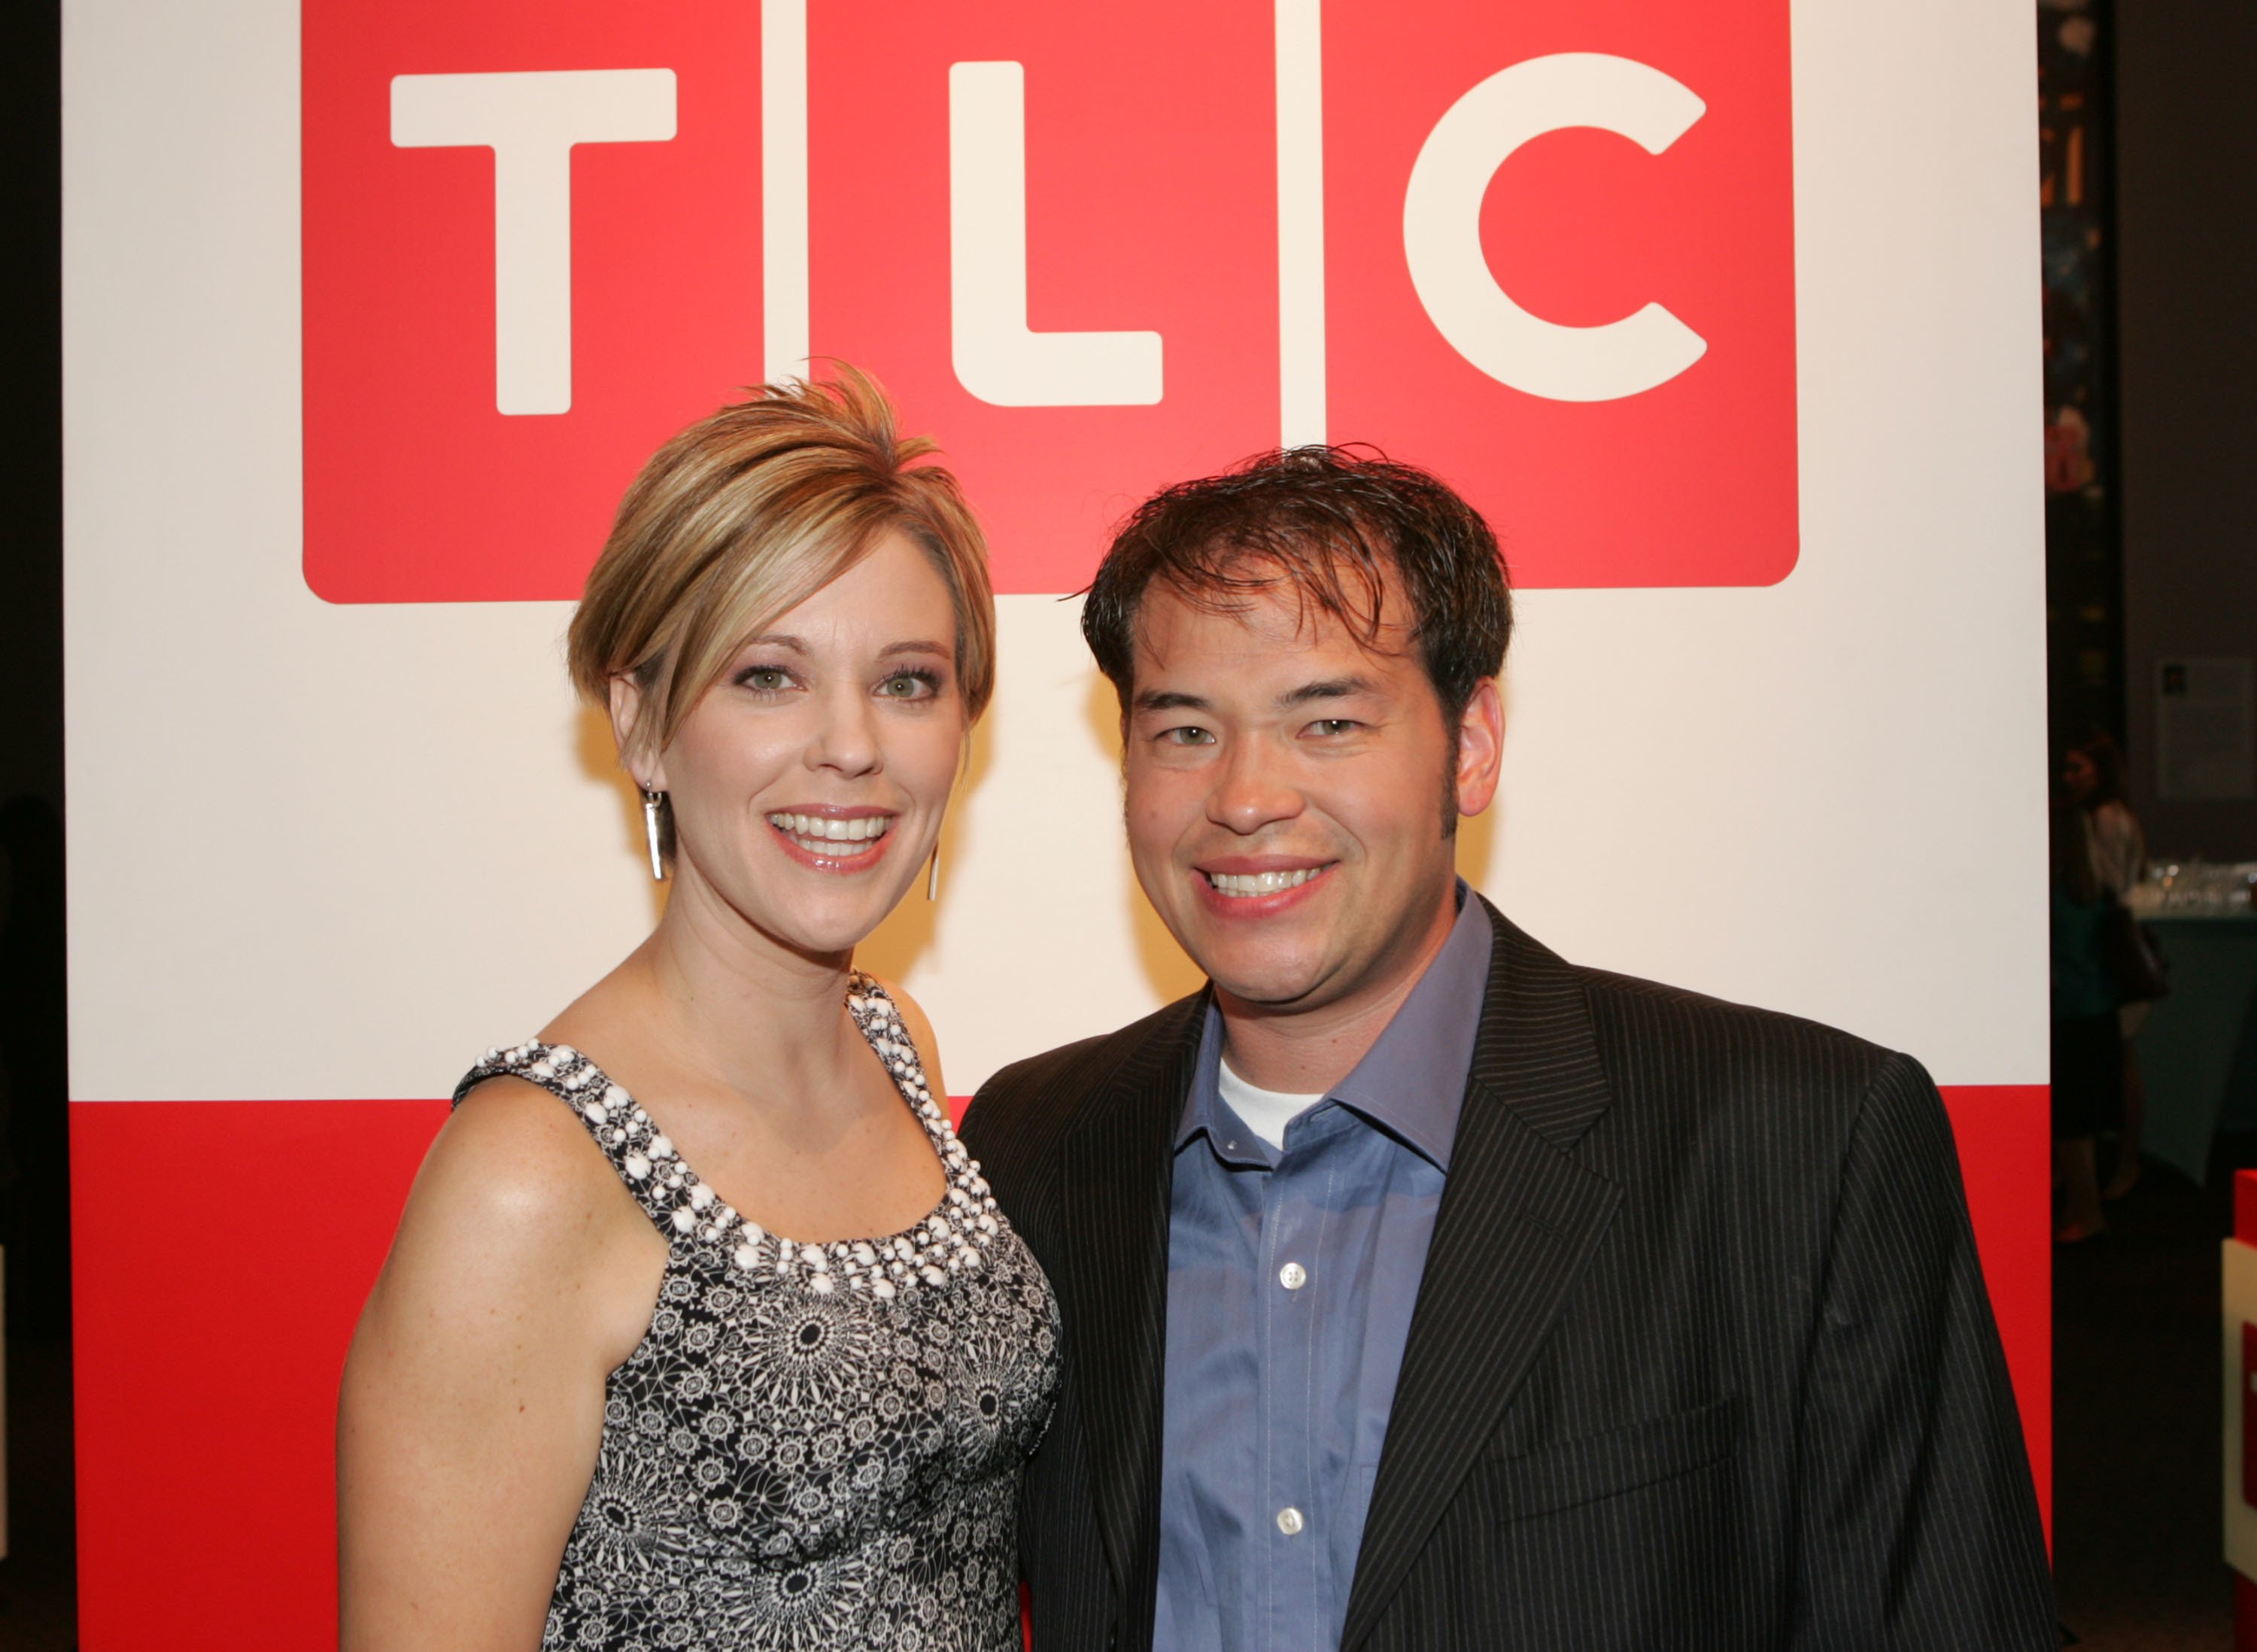  Jon and Kate Gosselin at the Discovery Upfront at Jazz event at the Lincoln in 2008 | Source: Getty Images